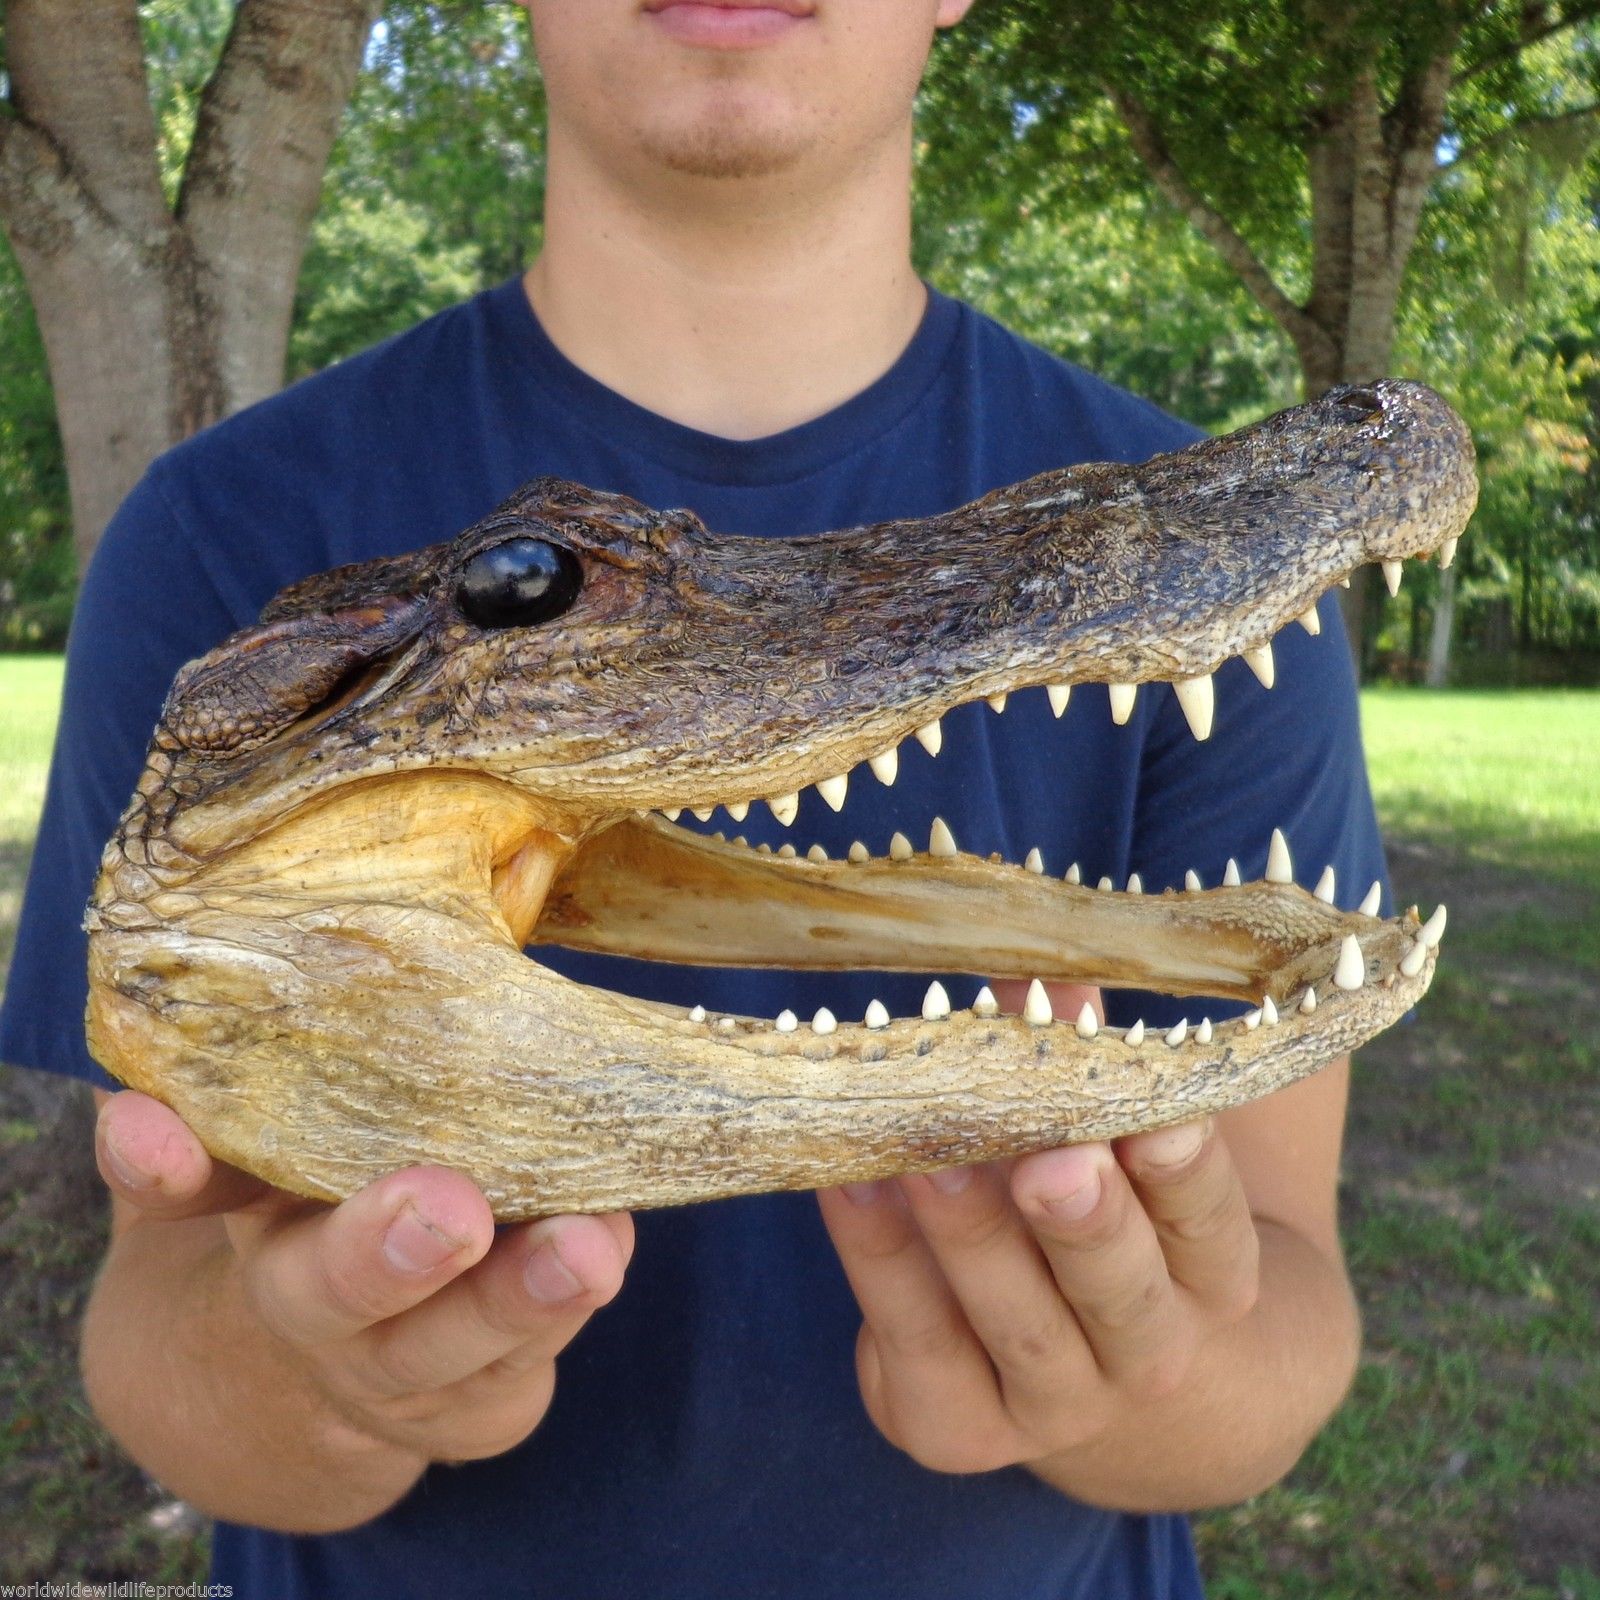 9 Inch Alligator Head From a 6 Foot Gator Real Taxidermy Reptile (s ...